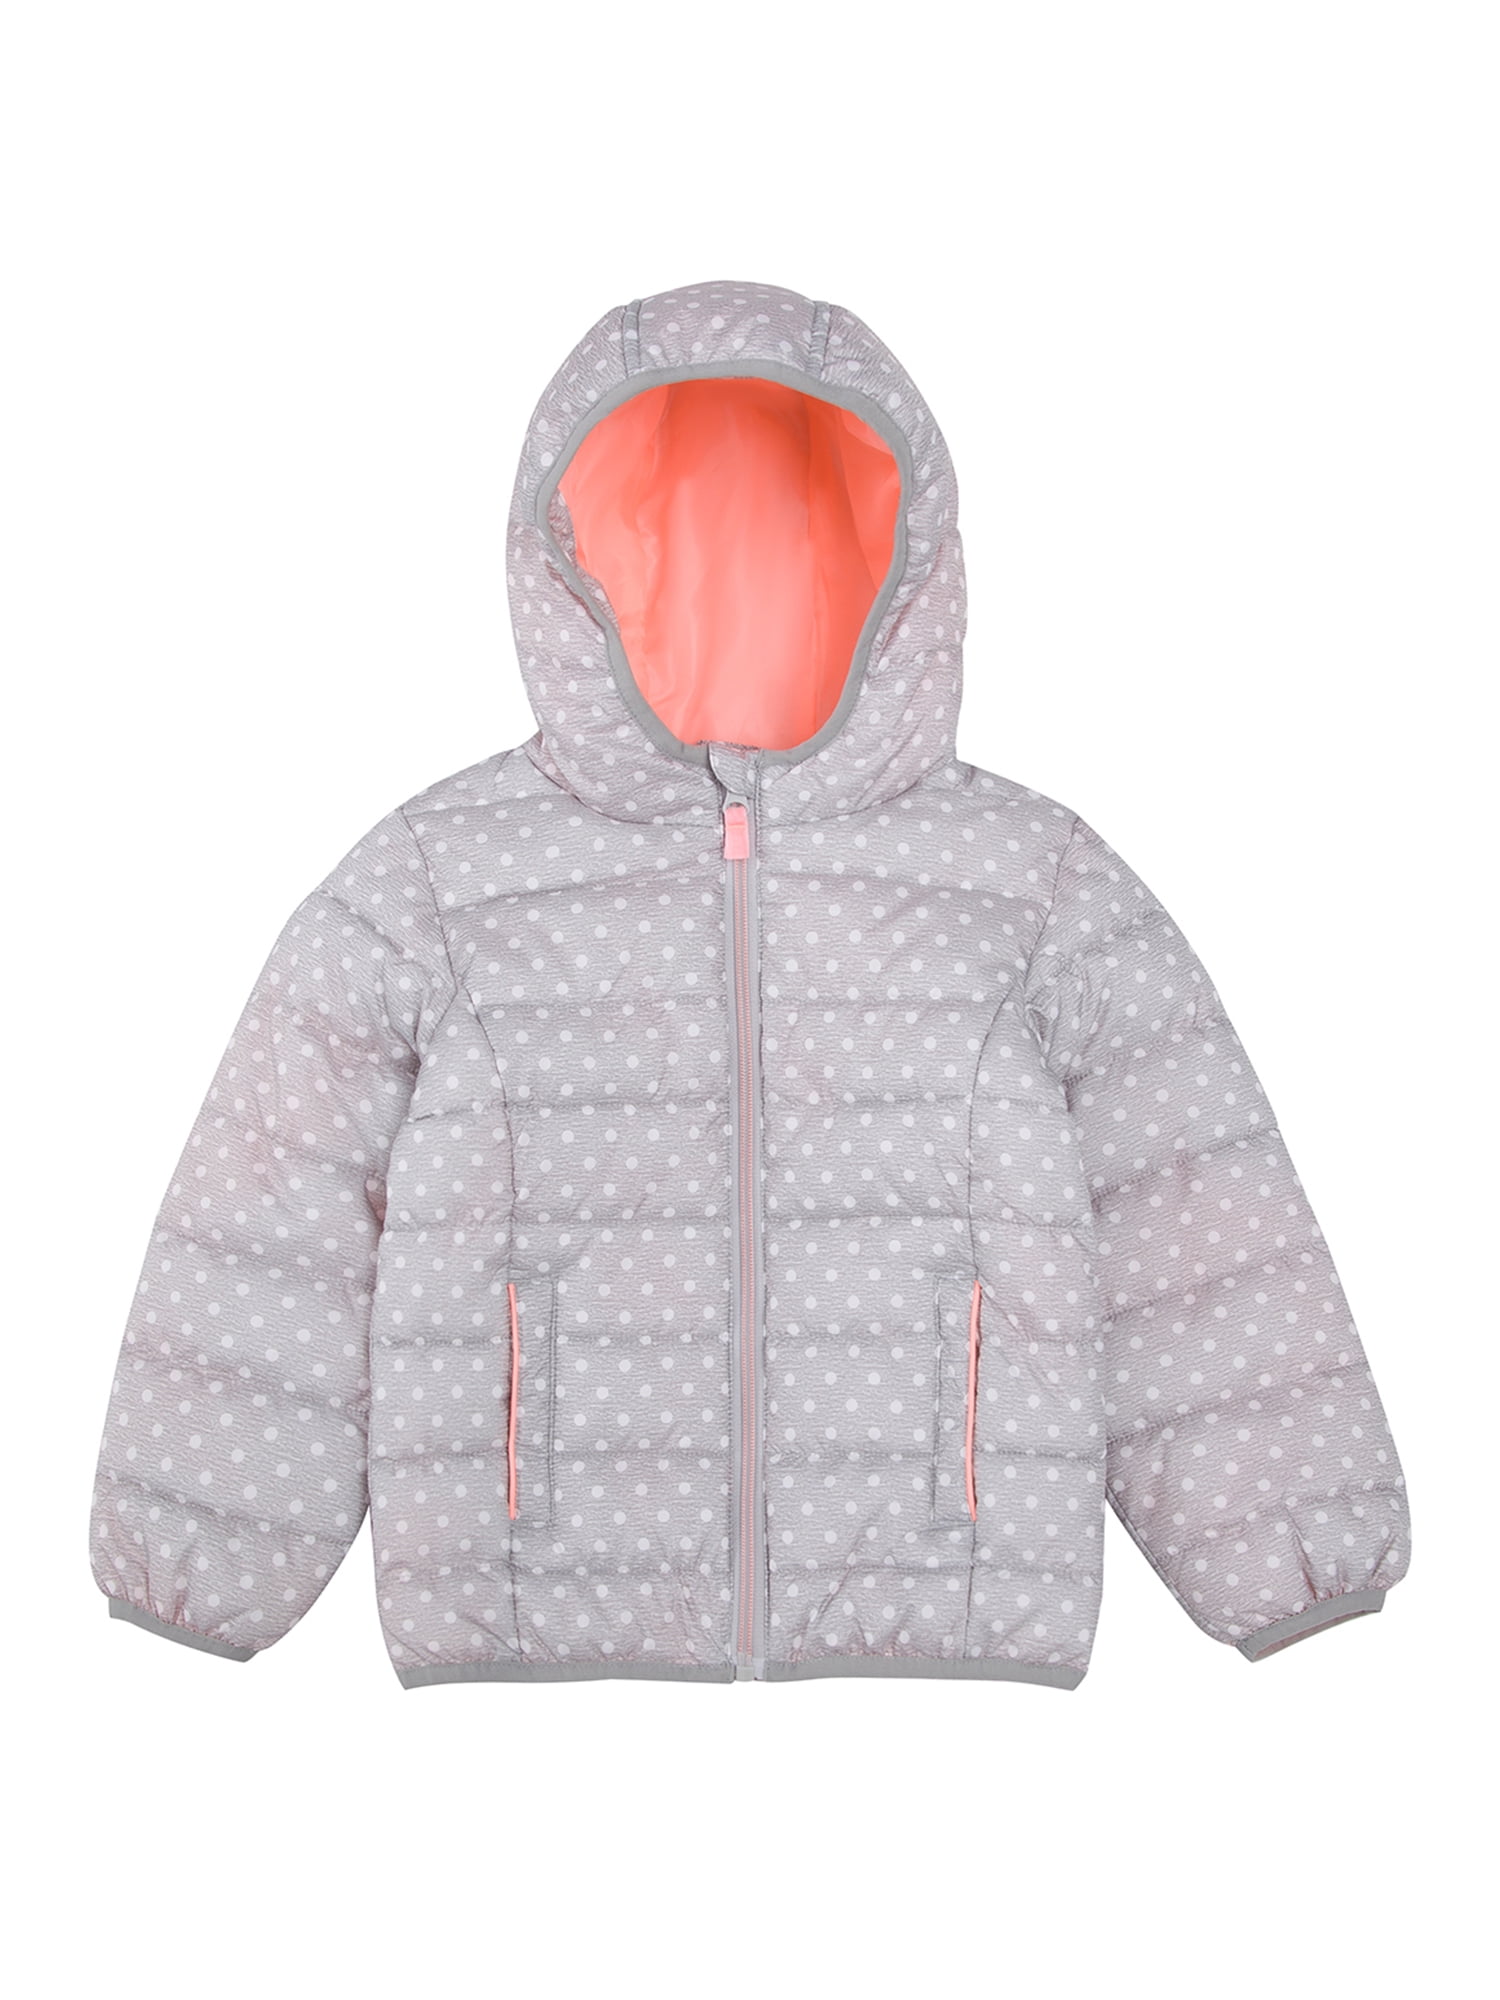 NEW CARTER'S BABY GIRL HOODED SHERPA JACKET PINK  GRAY OR  AQUA 18M 5T 2T 4T 